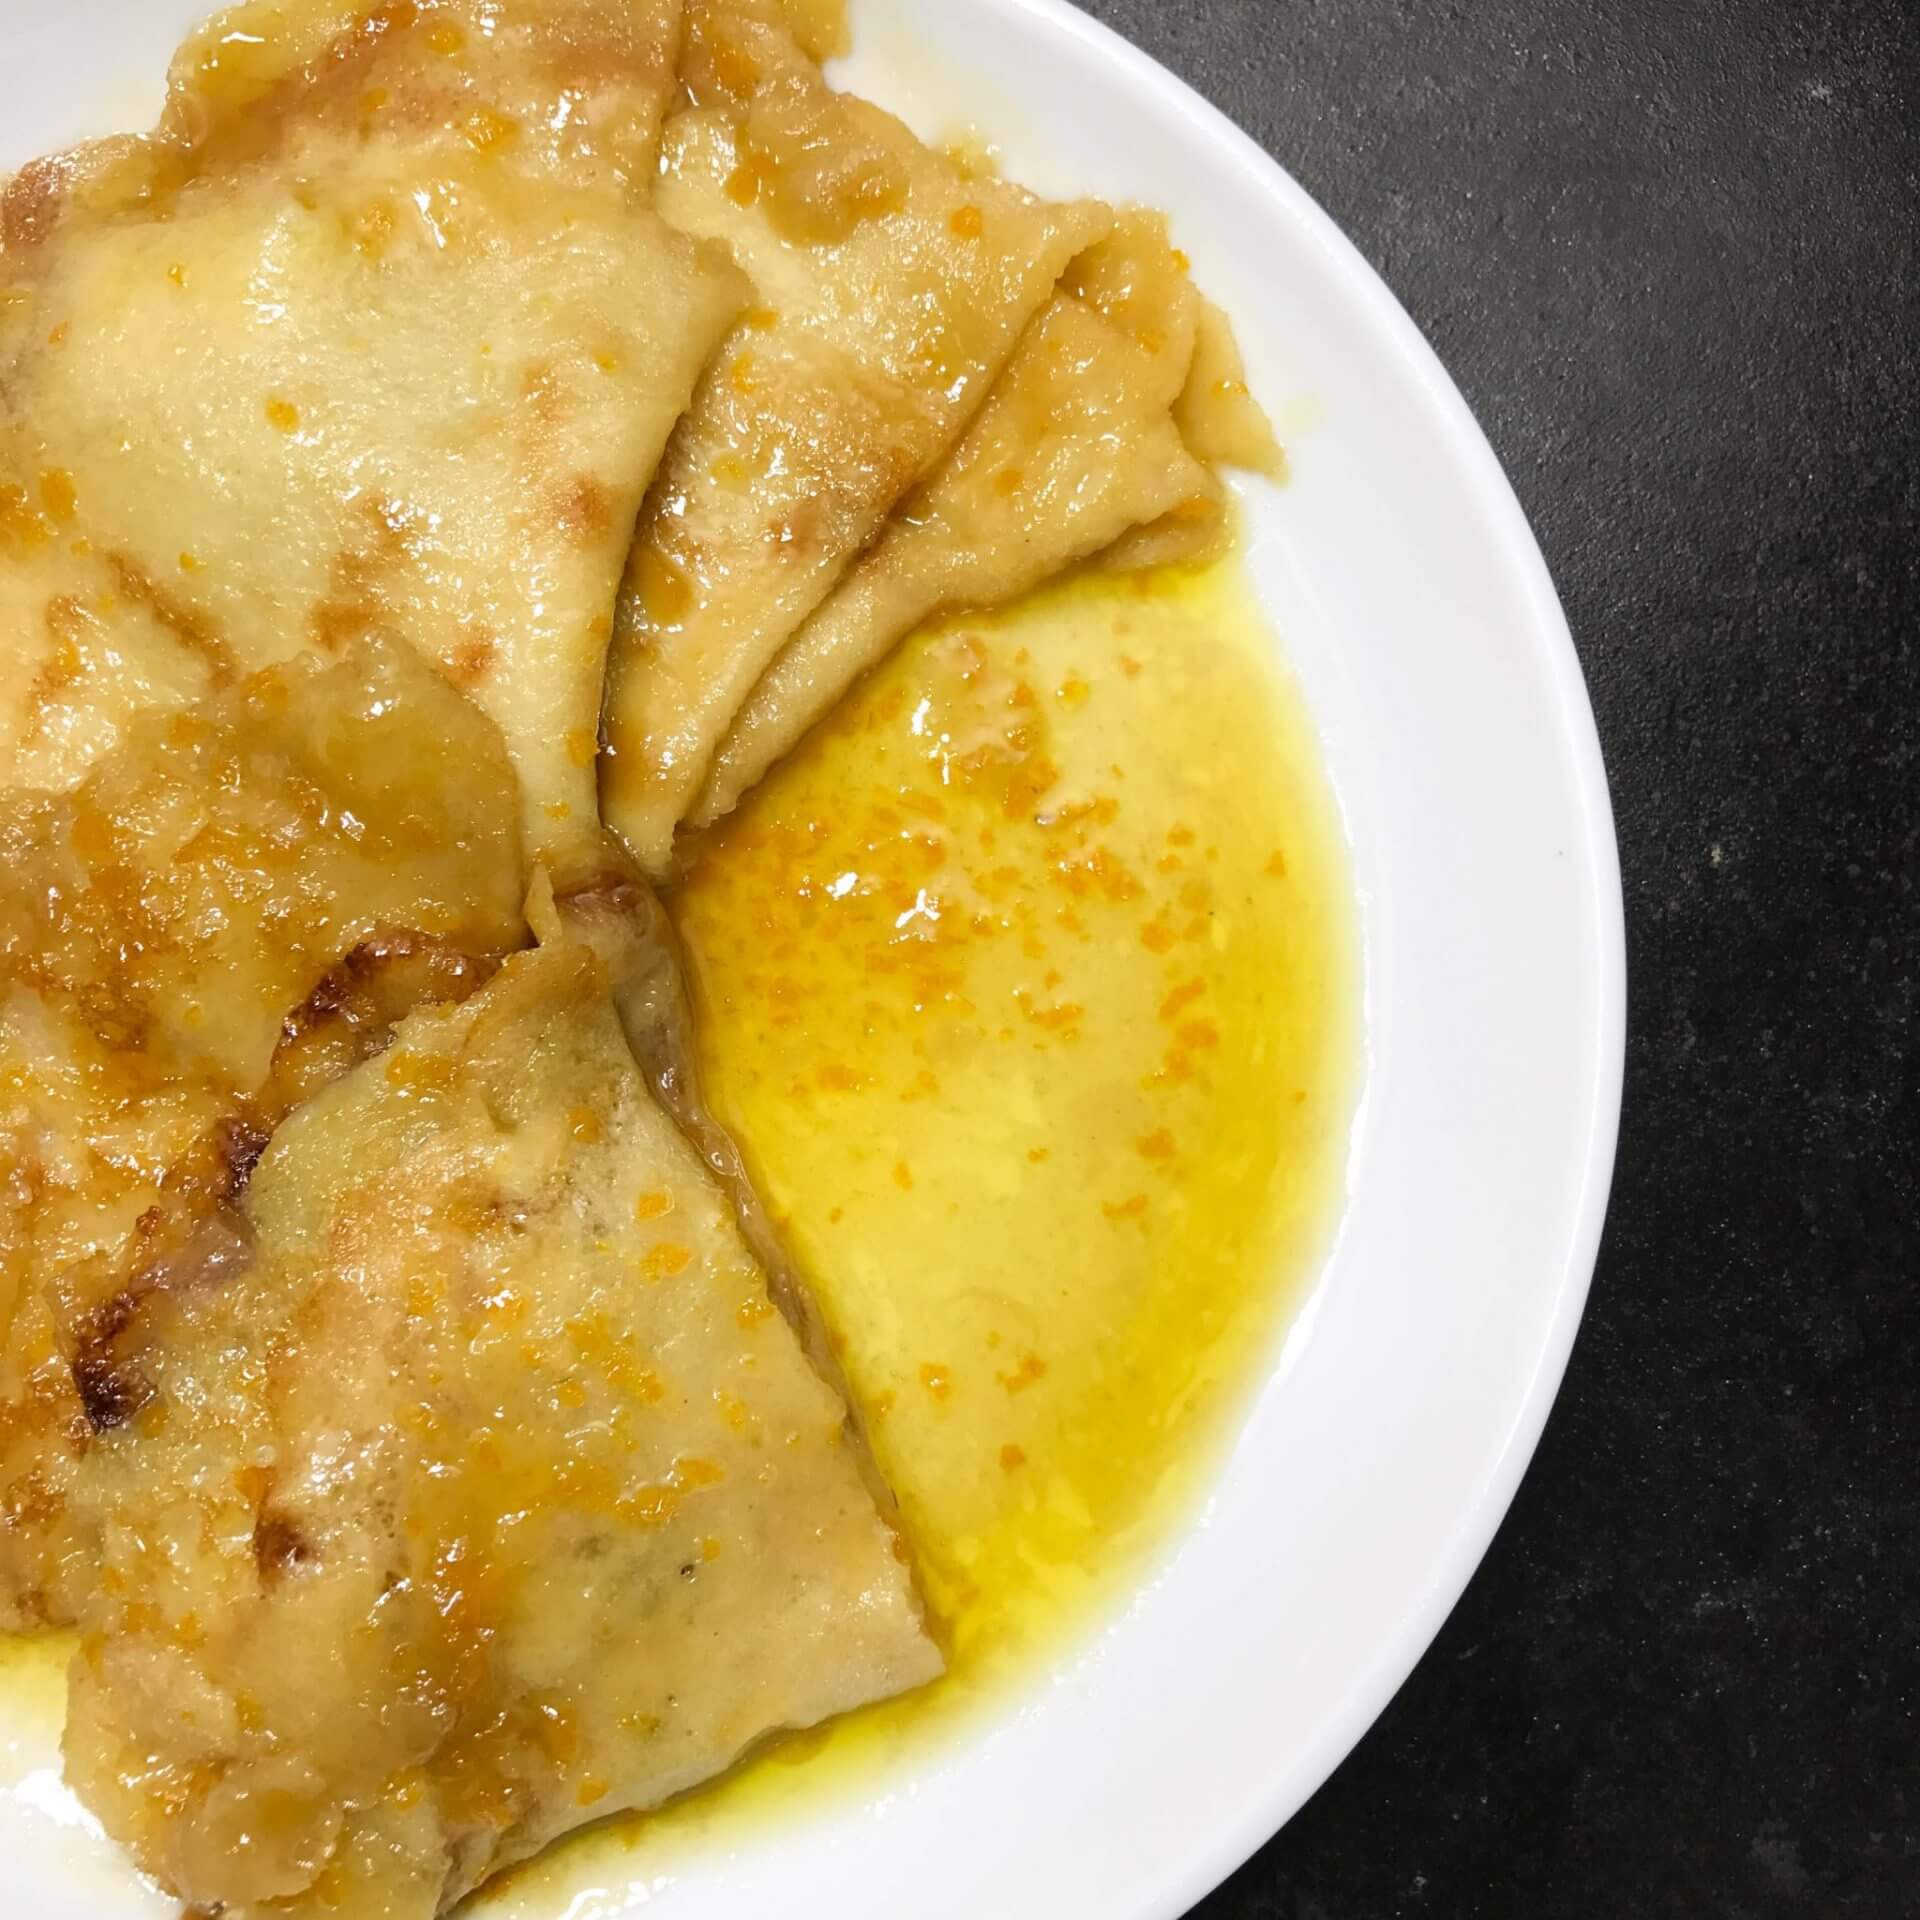 No. 1 Classic Crepes Suzette With Rum: Irresistible Delight